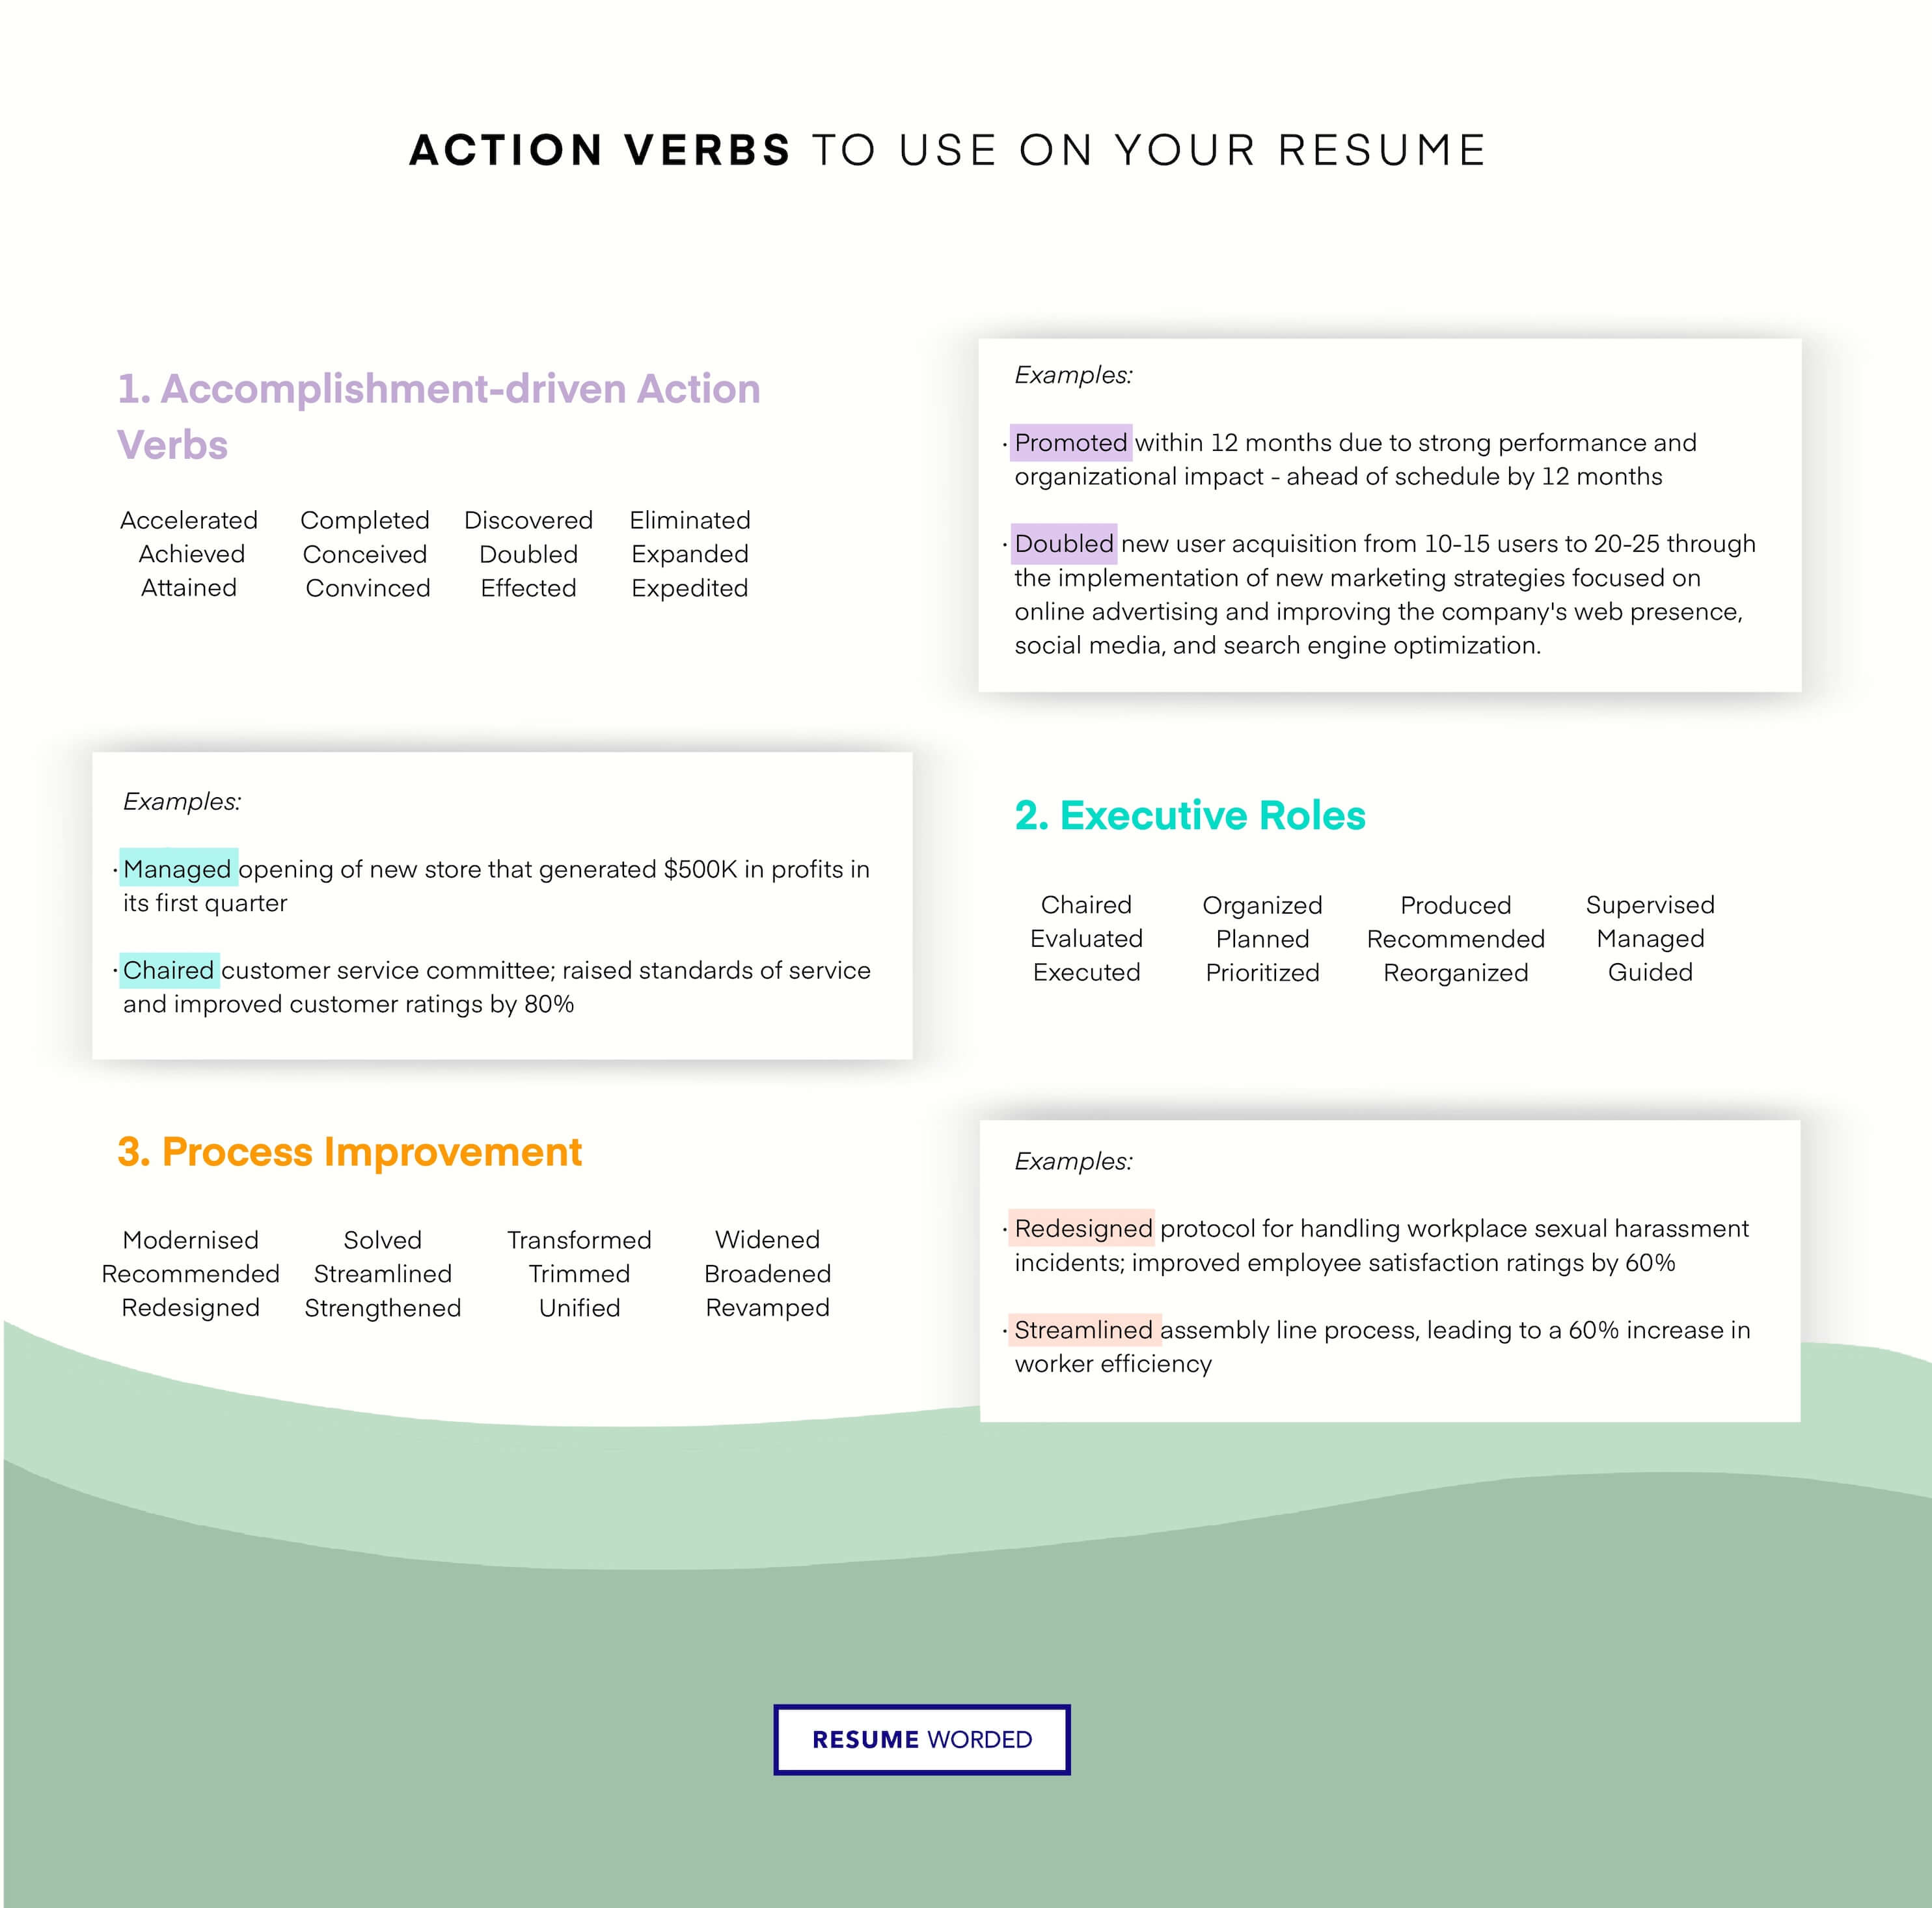 Describes digital marketing accomplishments using clear action verbs - Digital Marketing Manager Resume